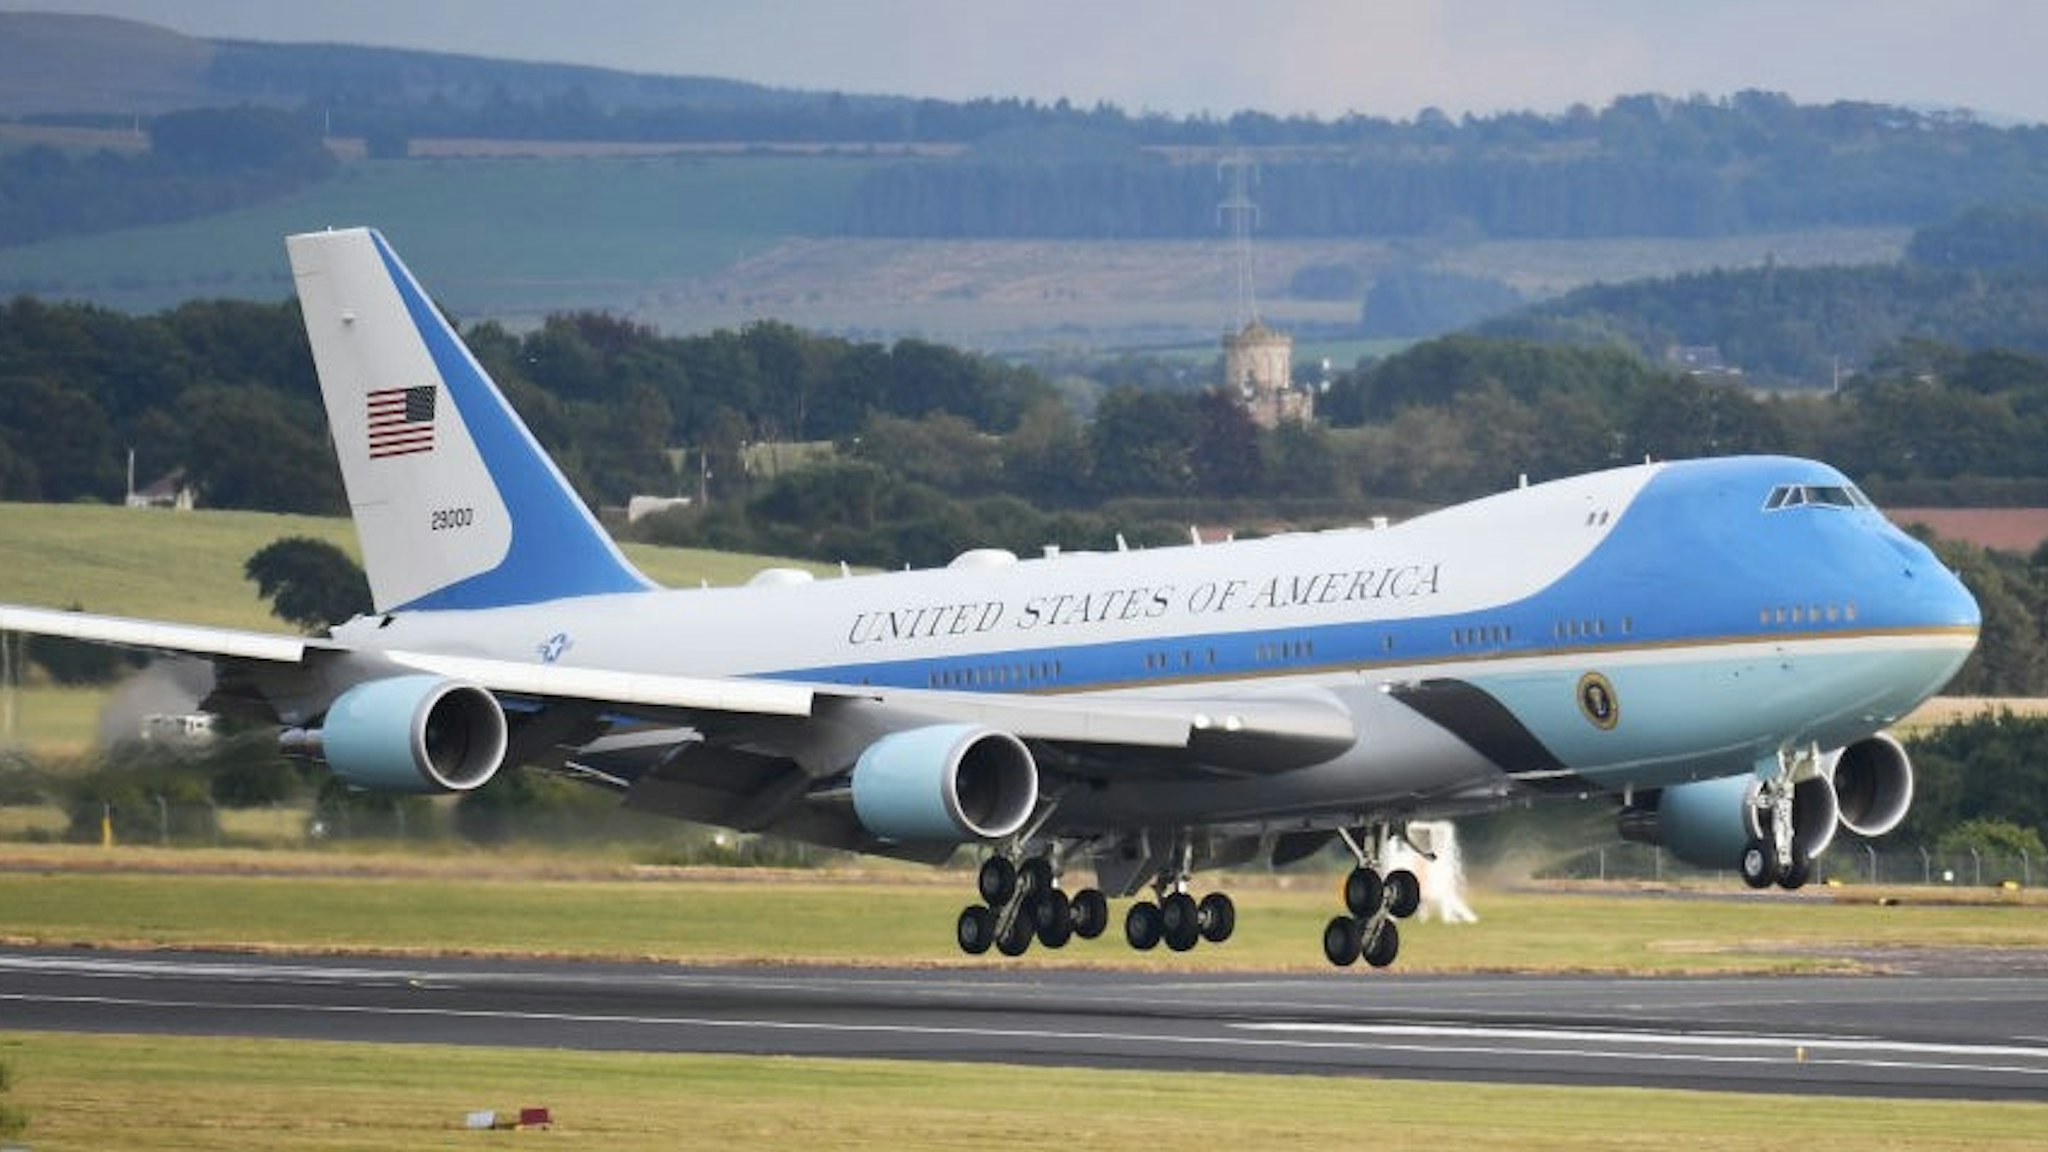 GLASGOW, SCOTLAND - JULY 13: Air Force One carrying the President of the United States, Donald Trump and First Lady, Melania Trump touches down at Glasgow Prestwick Airport on July 13, 2018 in Glasgow, Scotland. (Photo by